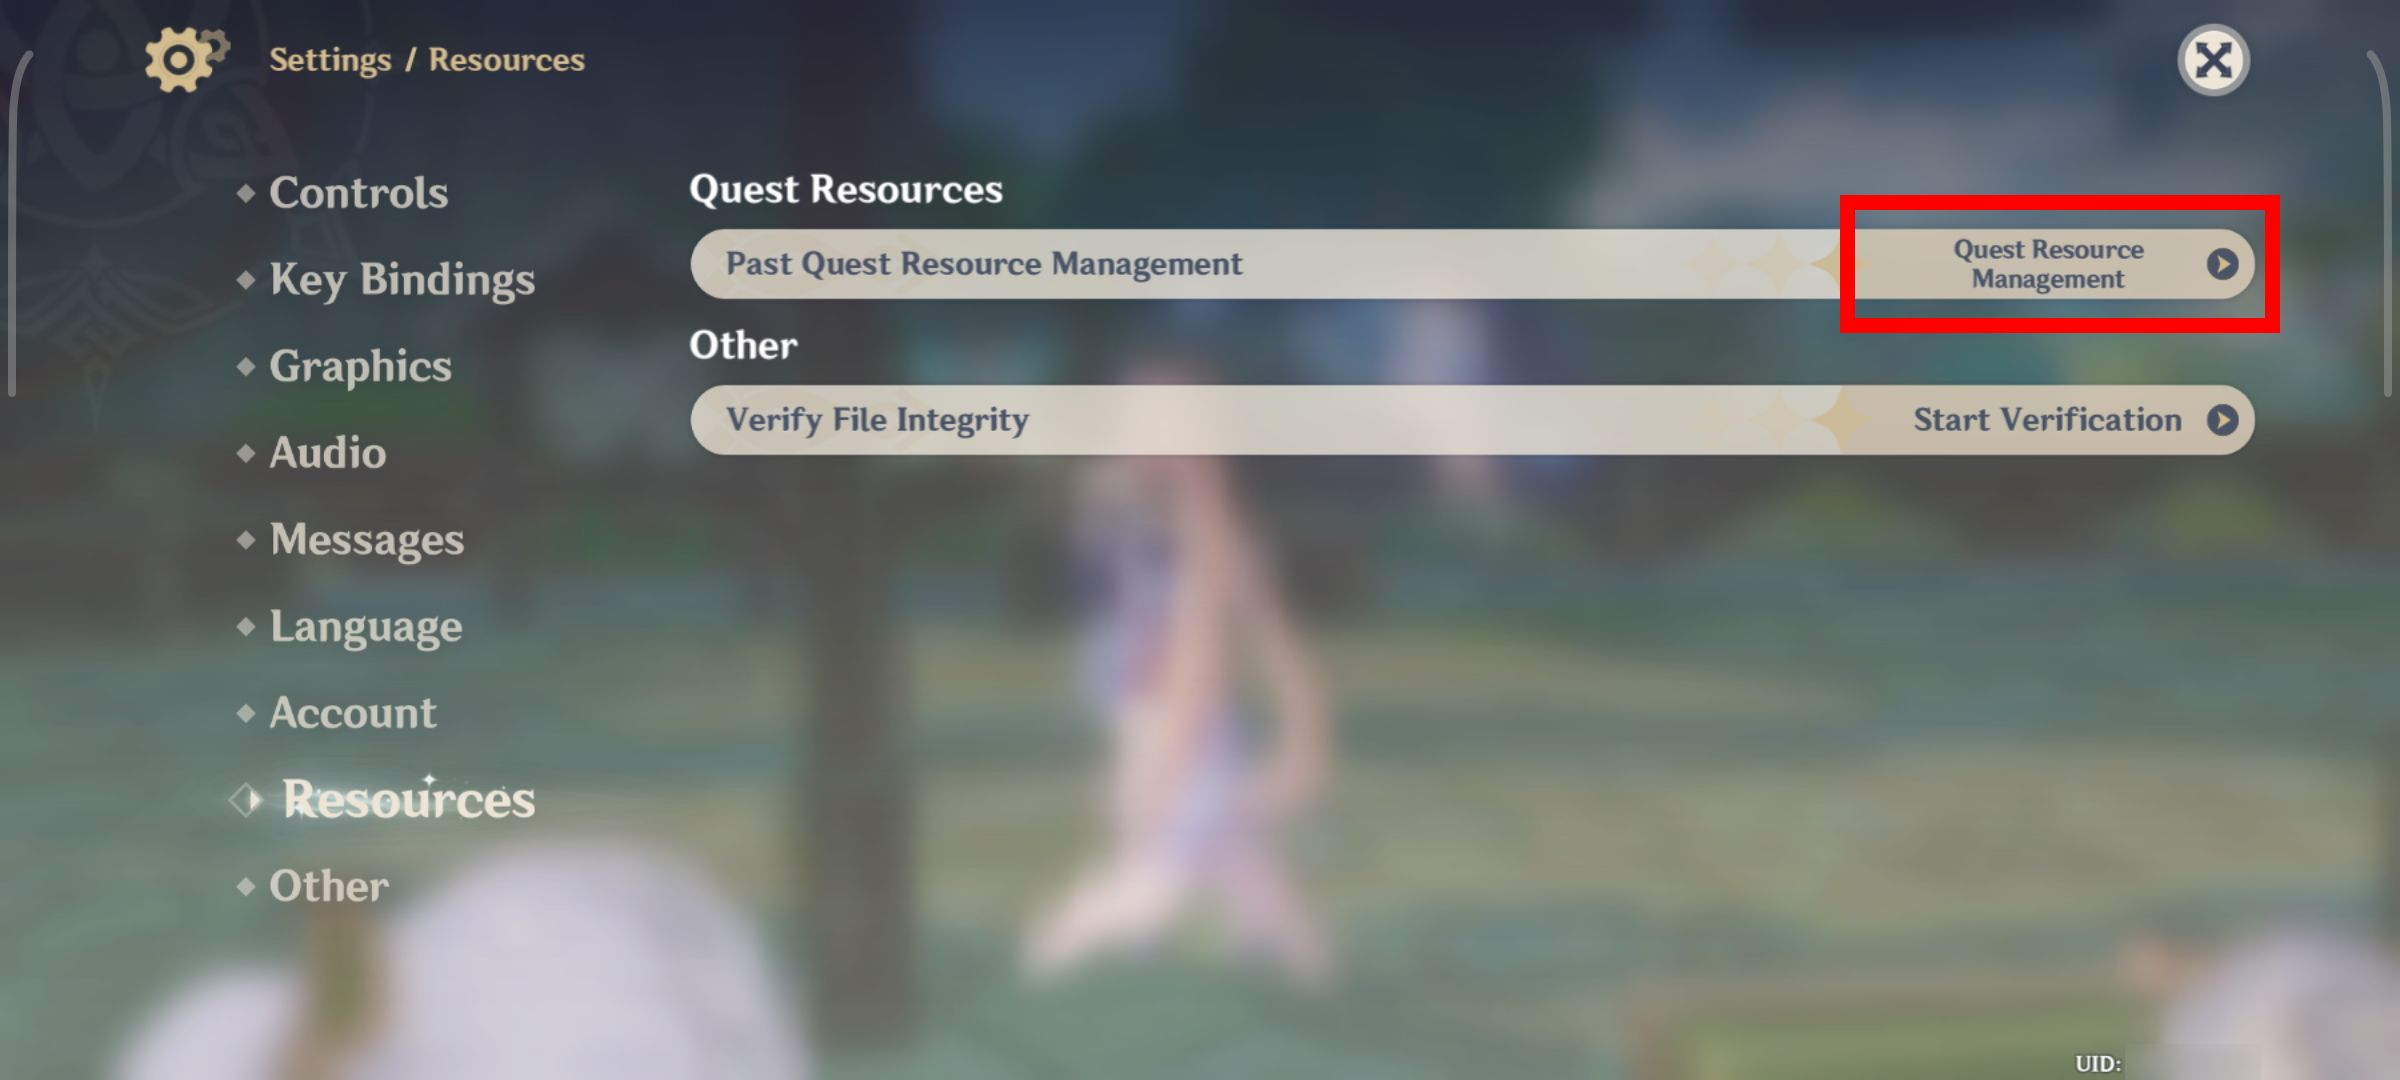 Red rectangle outline over quest resource management in Genshin Impact on Android